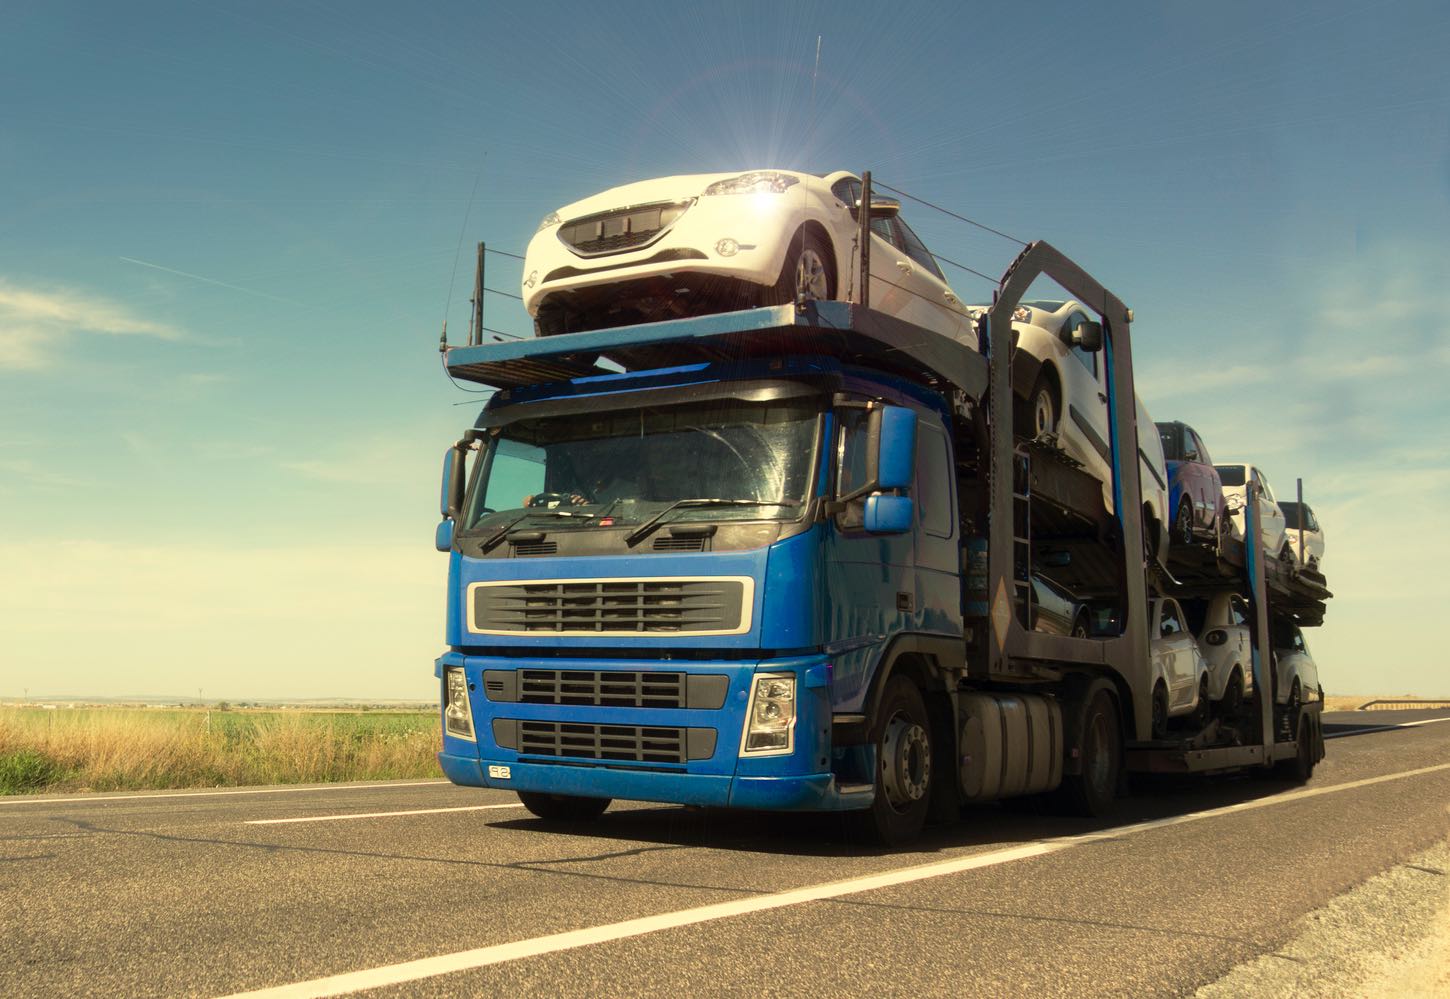 Steering Success: Ship A Car’s Mastery in Remarketed Vehicle Transportation